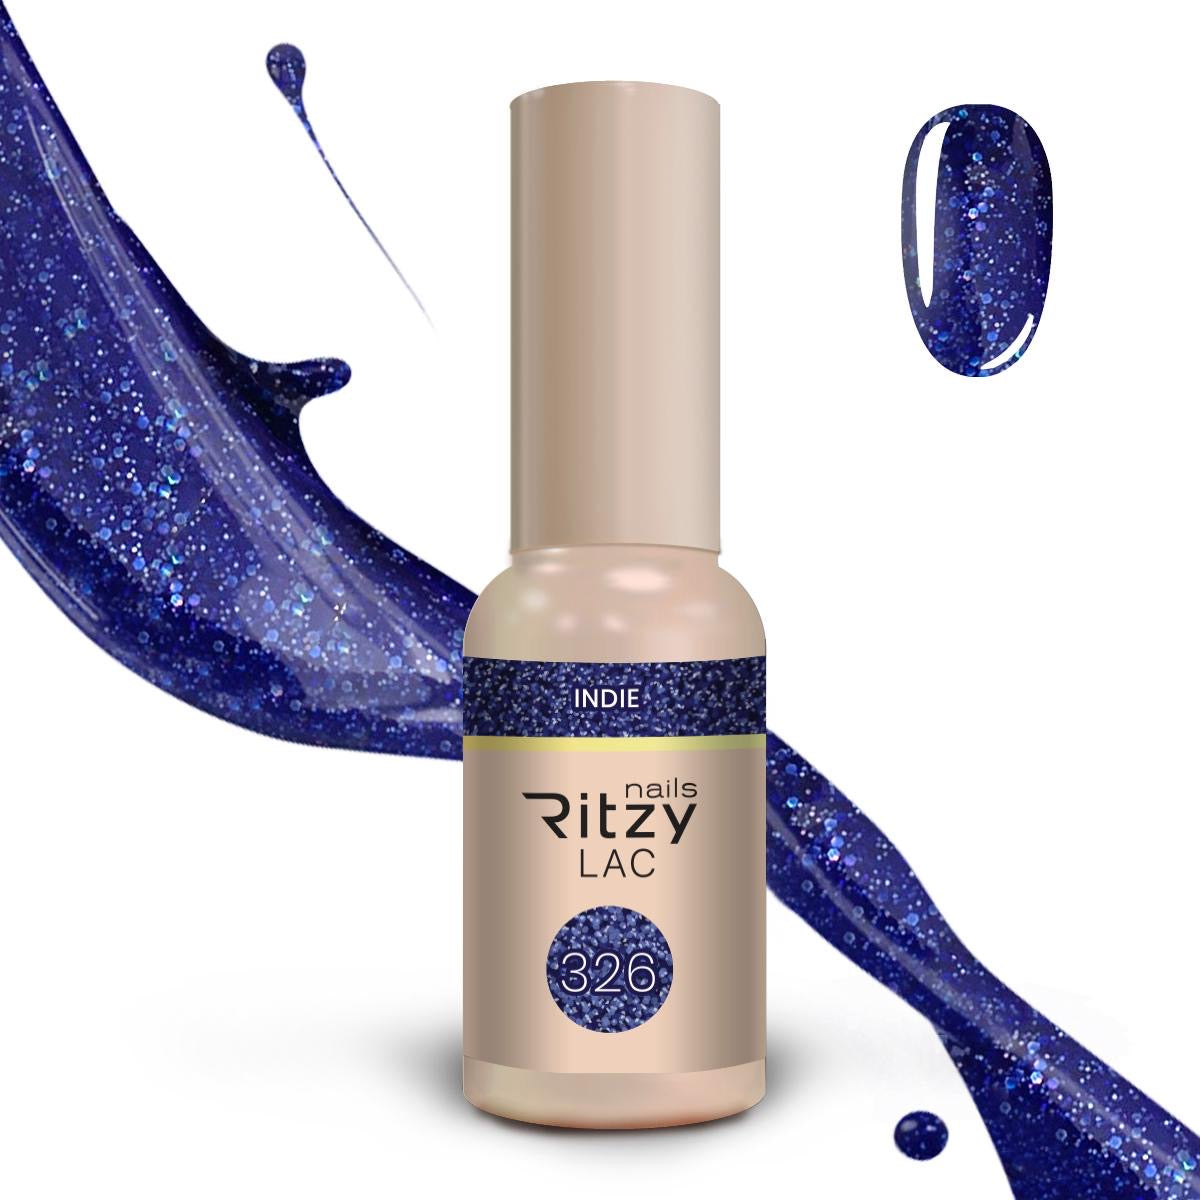 Ritzy Nails “Let it Glow ”collection of 10x 9ml colors.